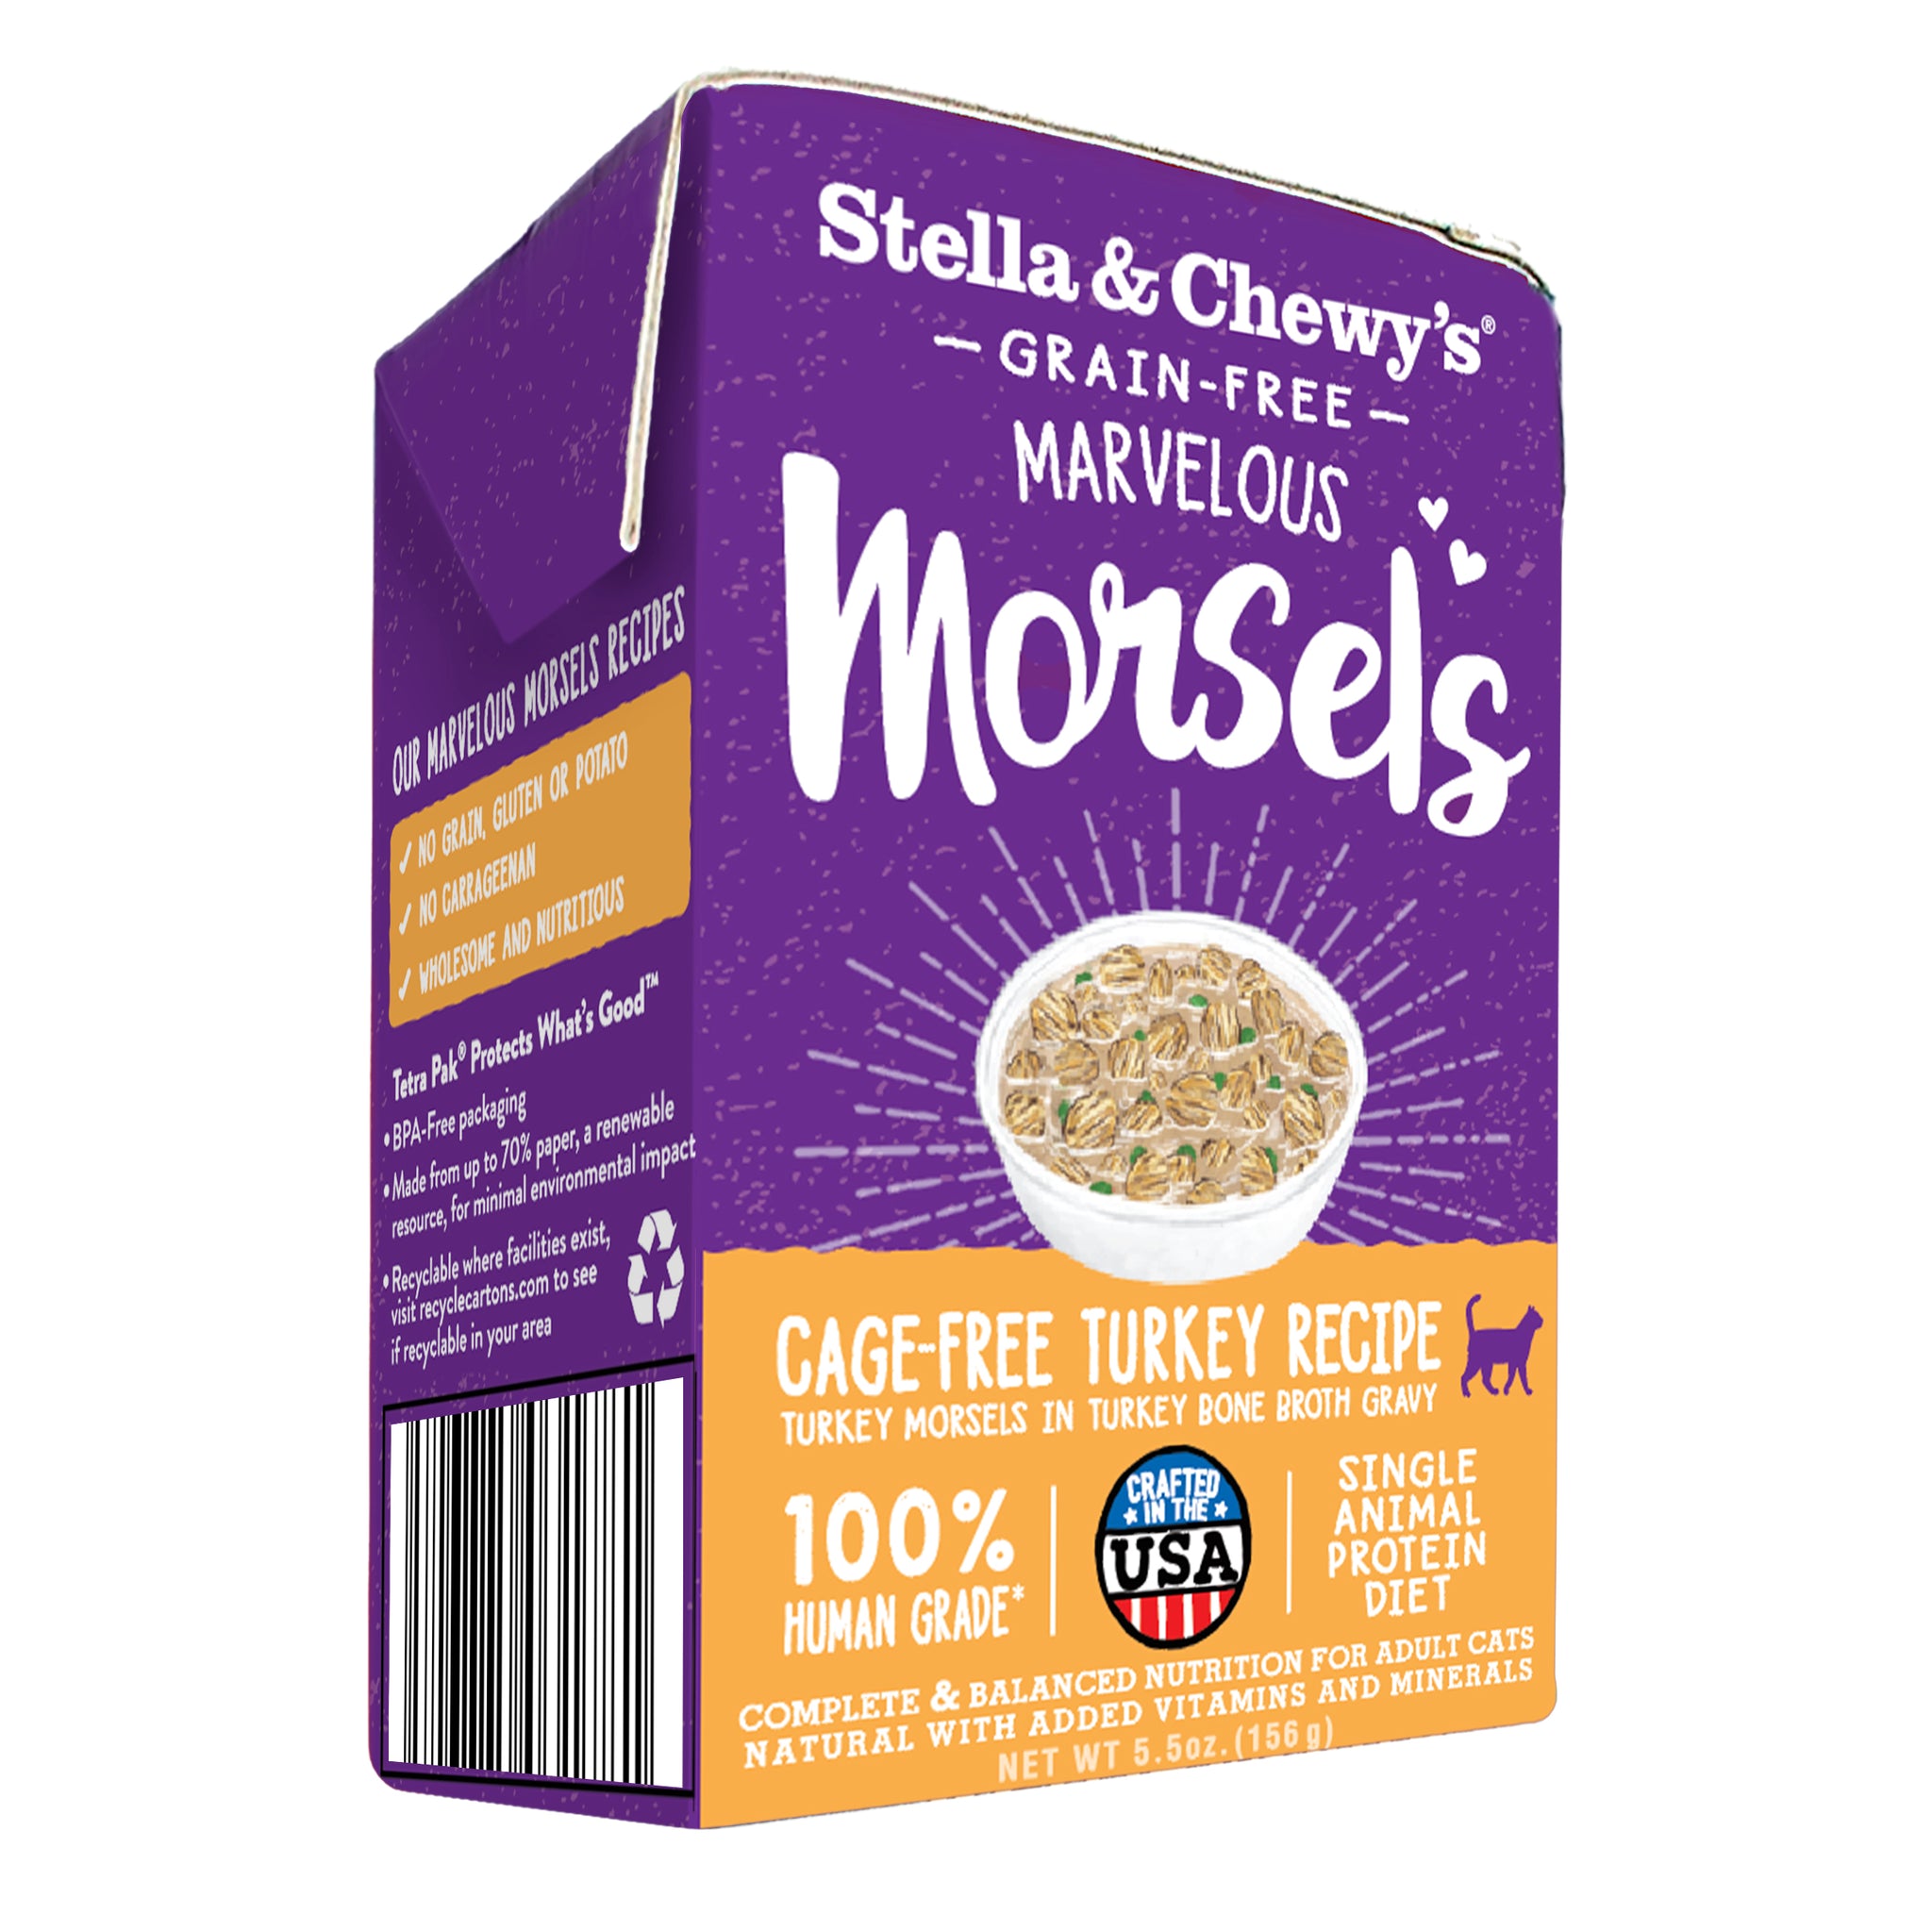 Stella & Chewy's Marvelous Morsels Cage-Free Turkey Recipe Dog Food